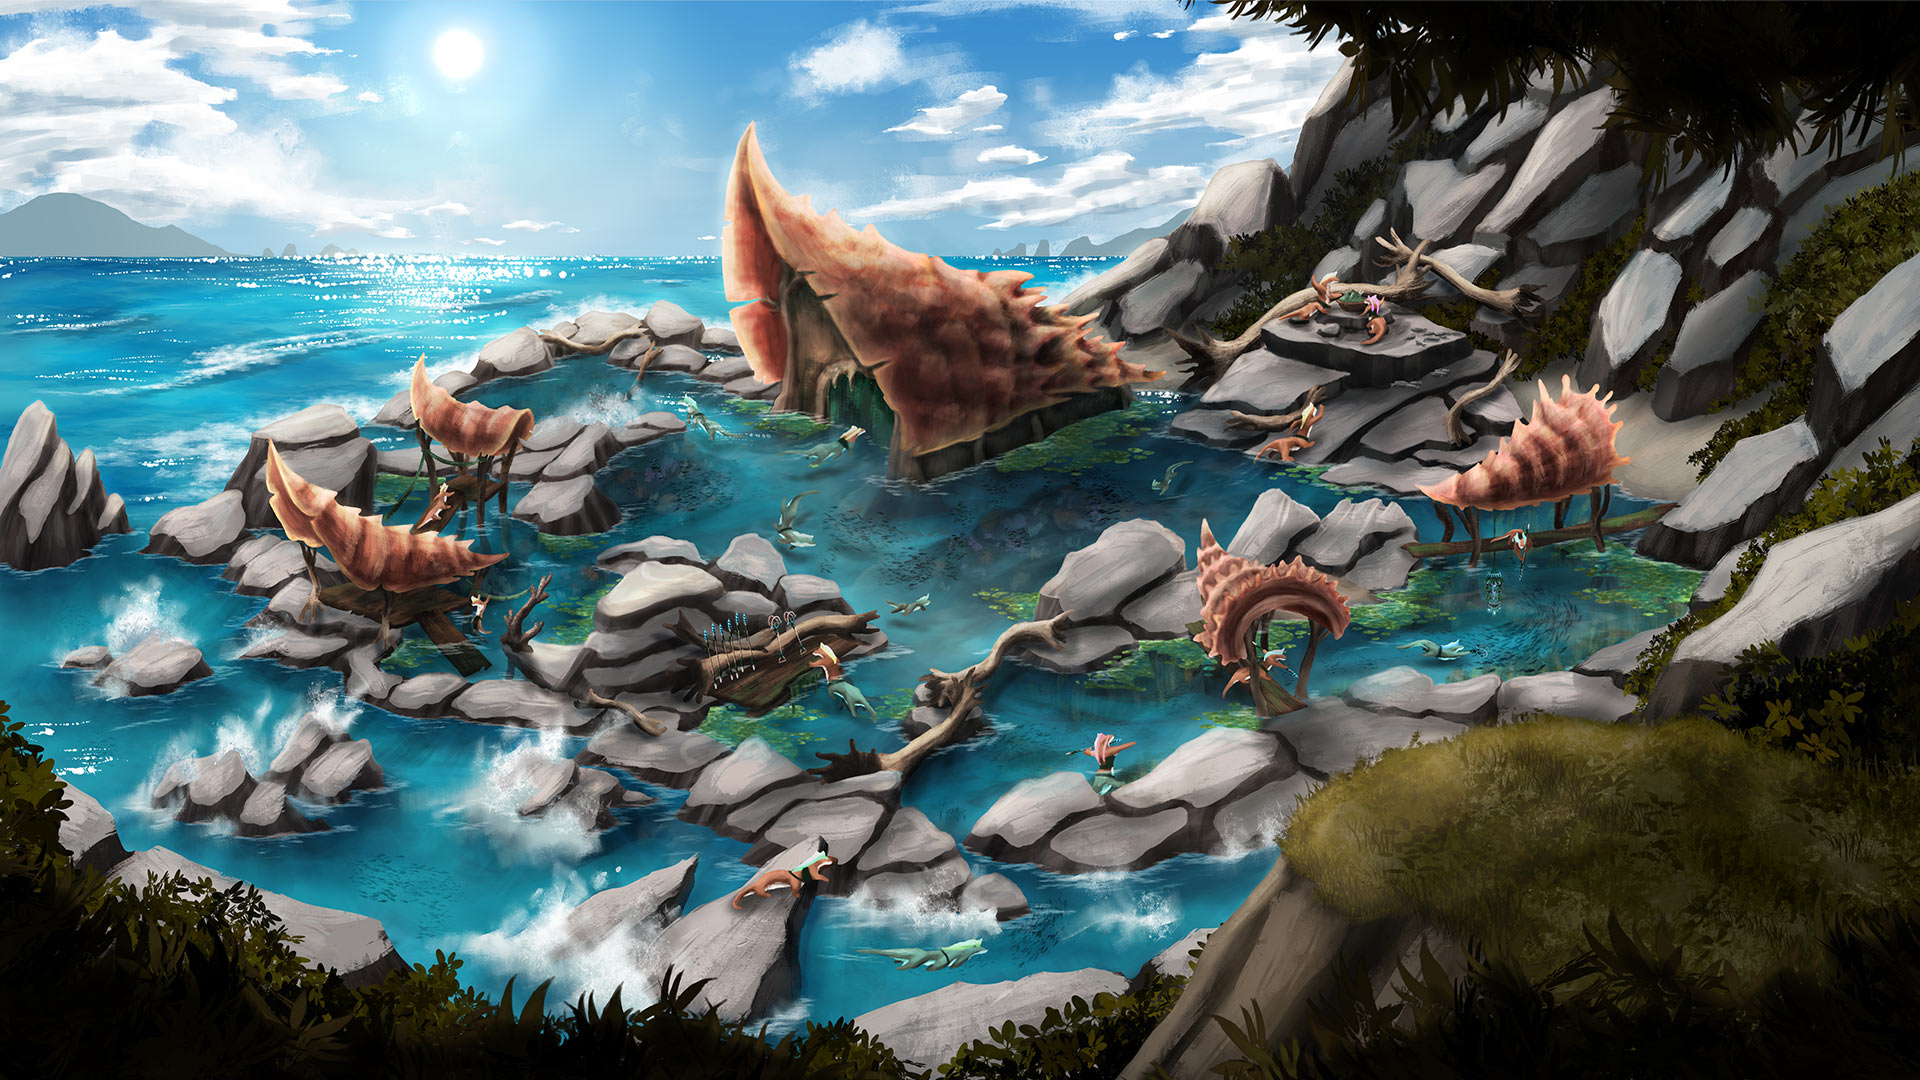 A full-scale digital painting of the Otteroids’ environment showing large shells for roofing and driftwood for structural supports.